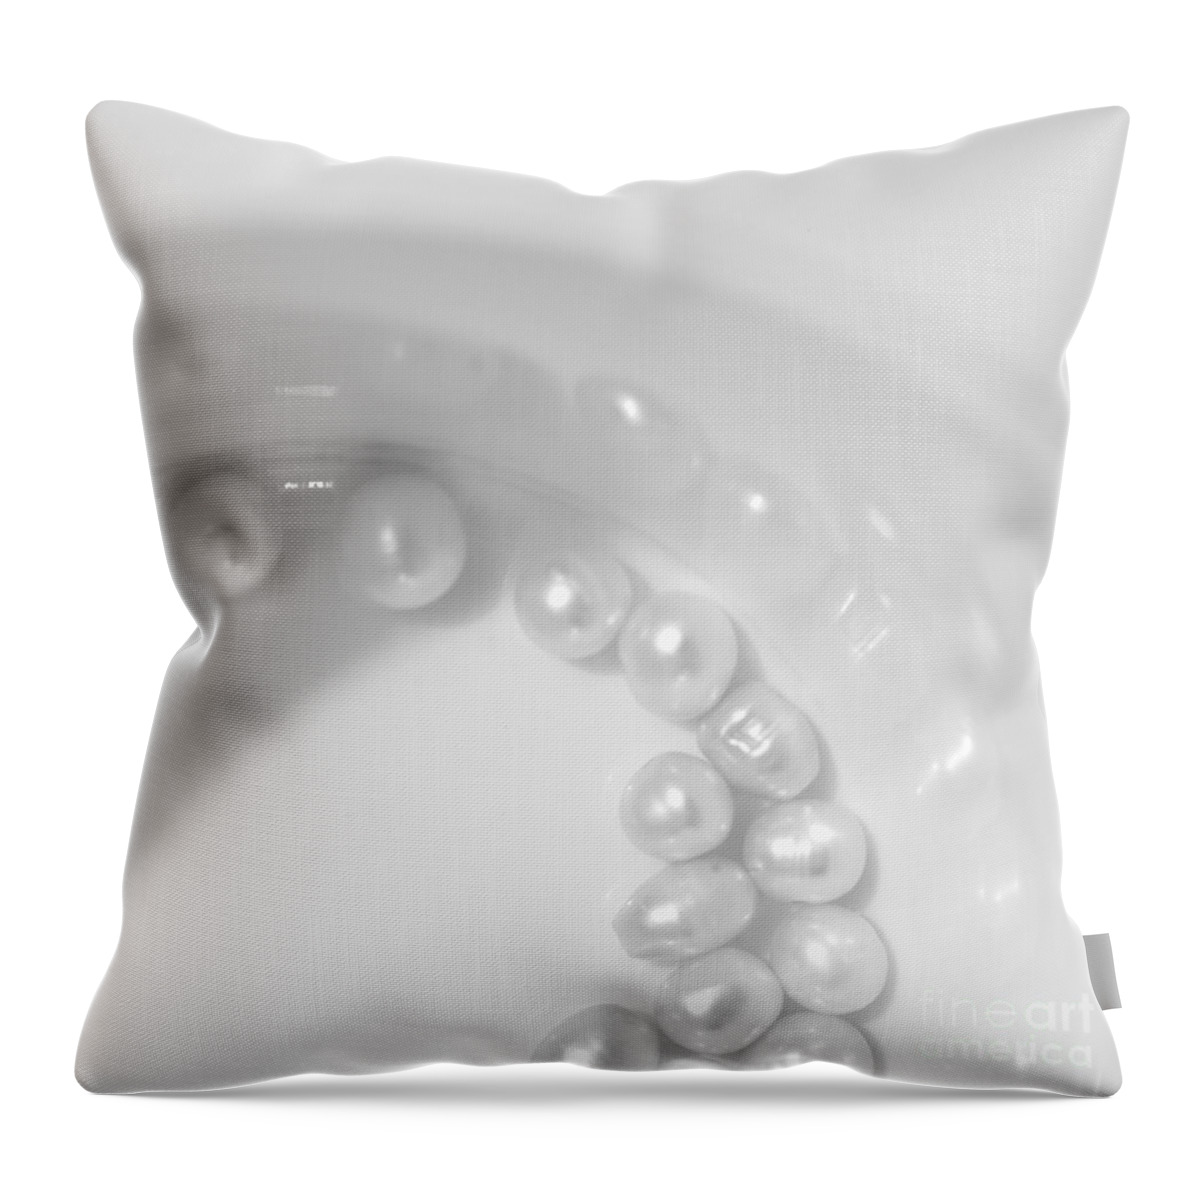 Accessory Throw Pillow featuring the photograph Pearls On A Cup by Stelios Kleanthous